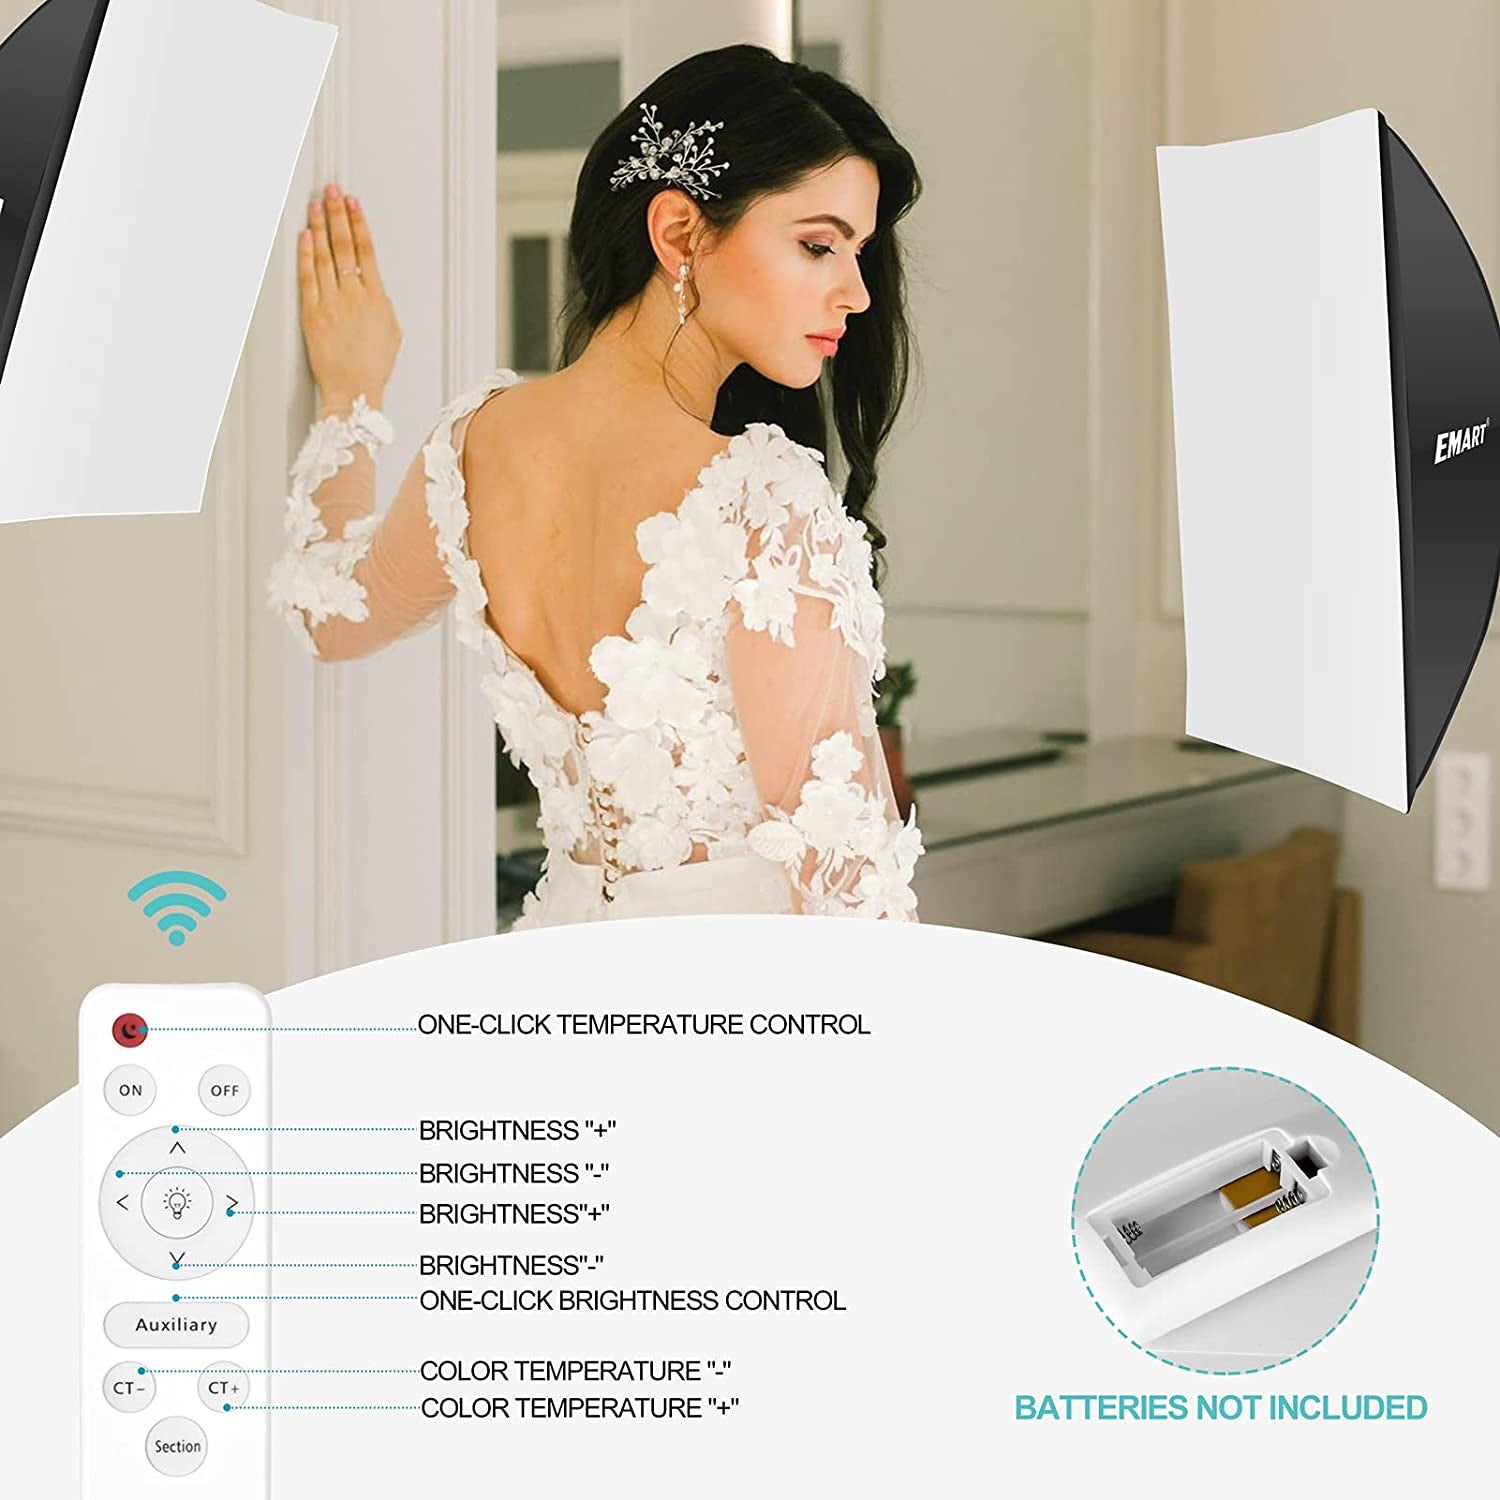 Softbox Lighting Kit, Dimmable Continuous Lighting